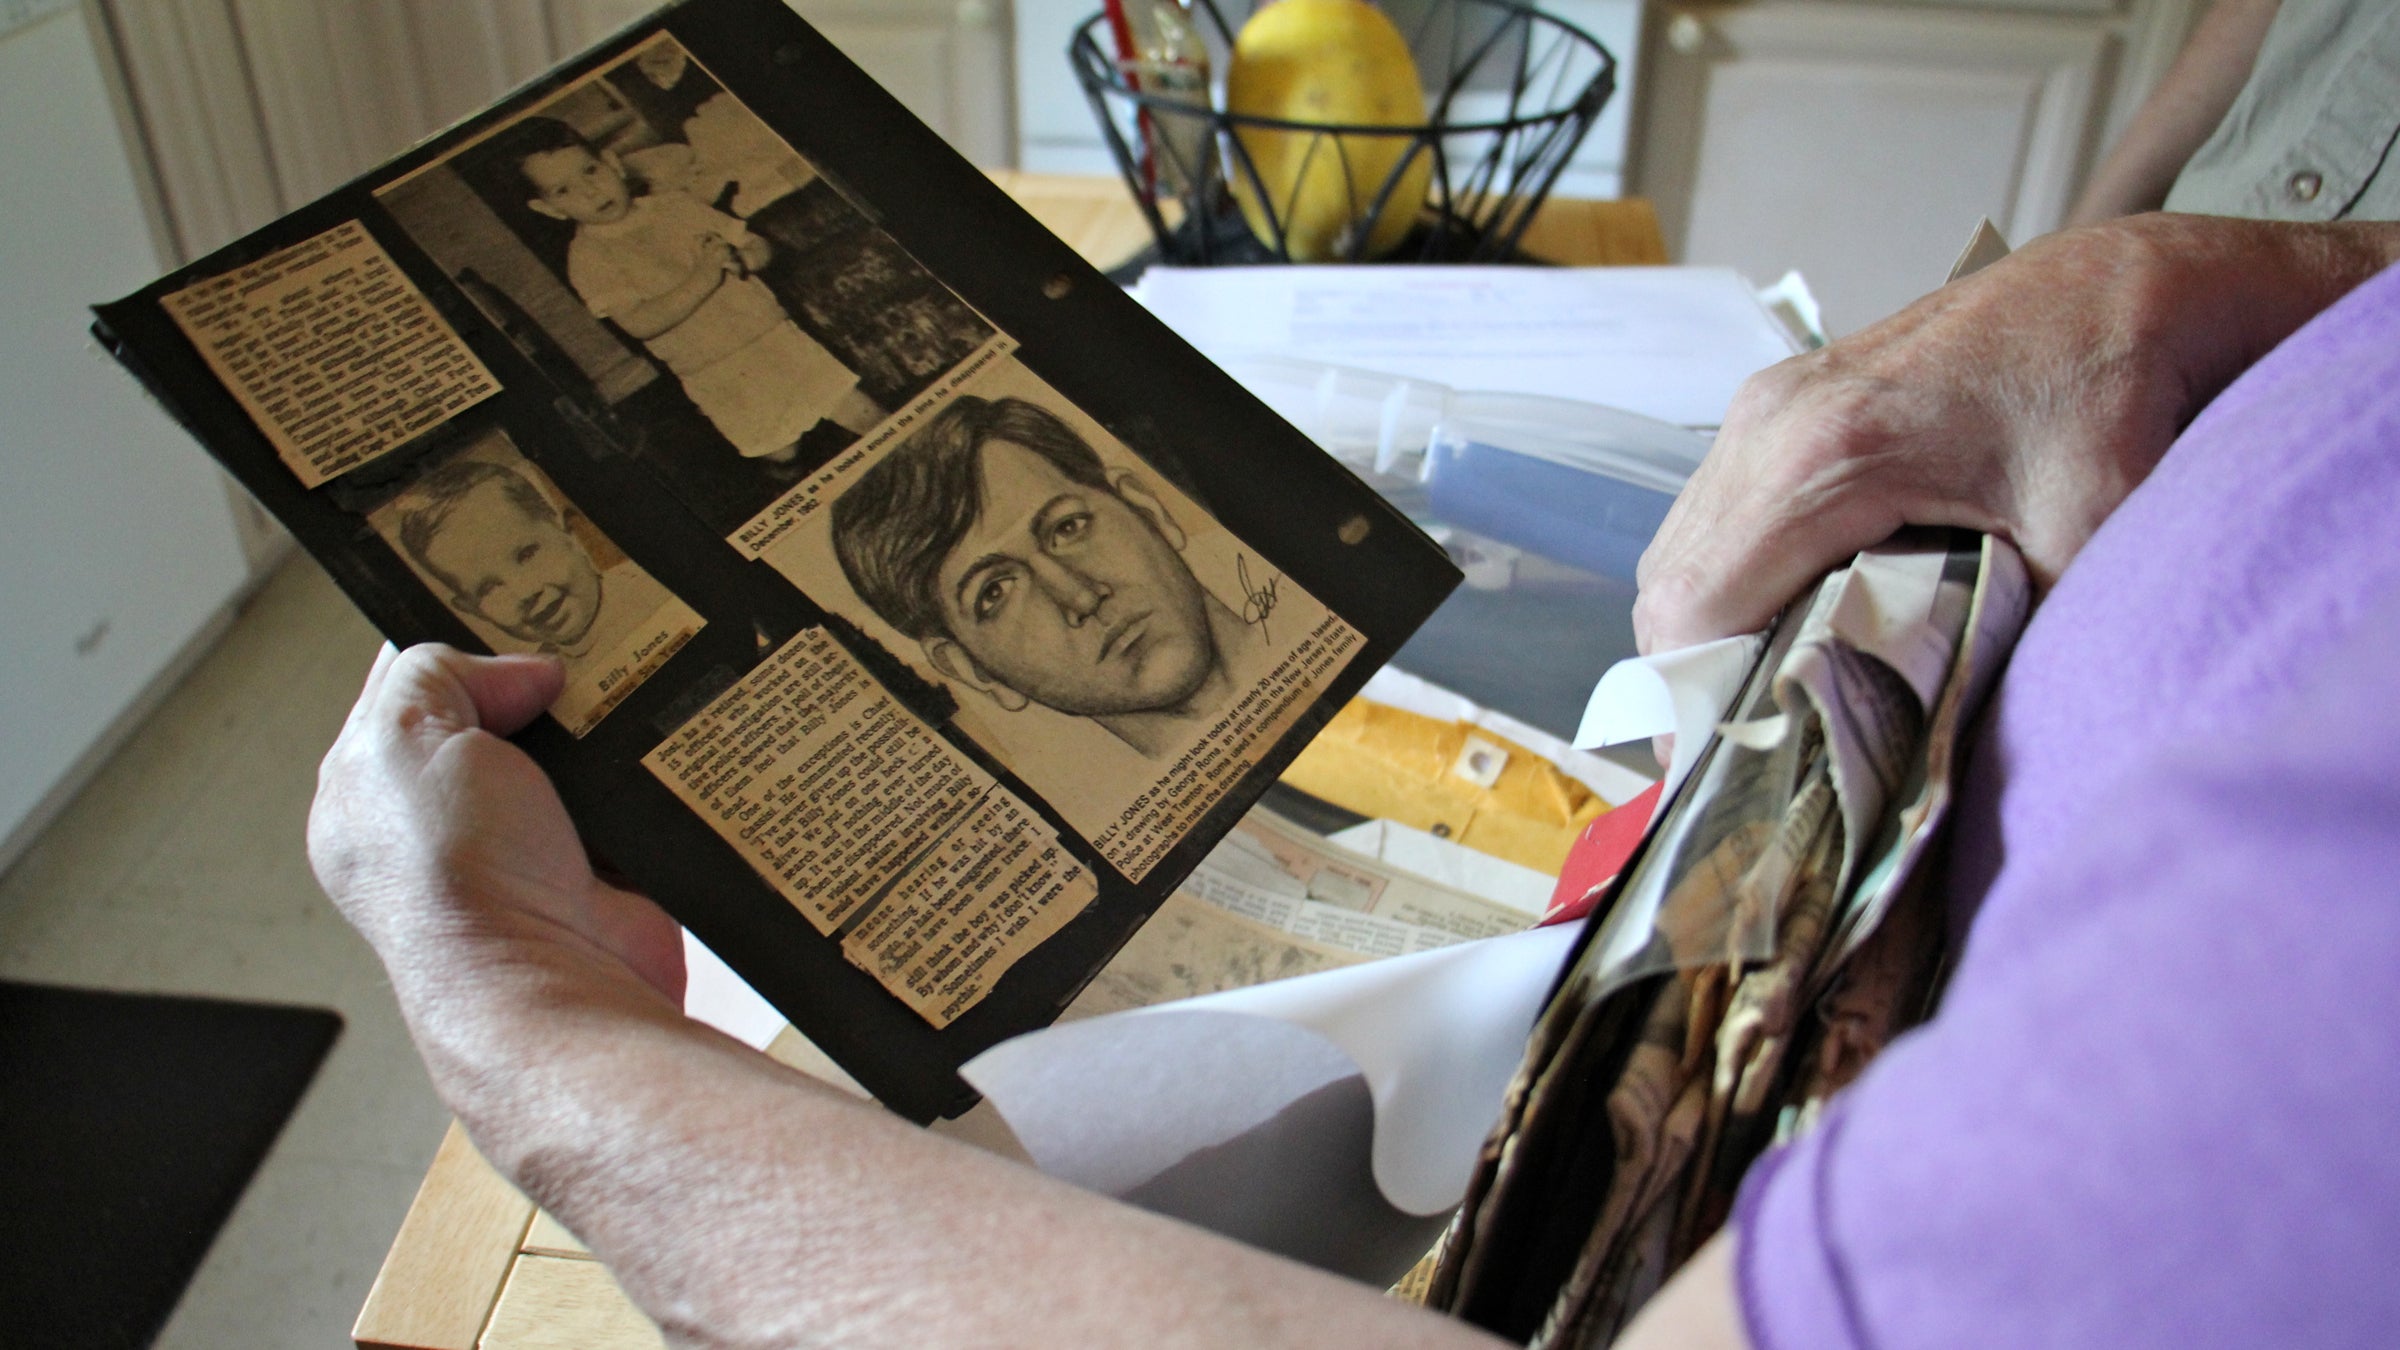  Jill Jones Neville looks through newspaper clippings about the disappearance of her brother, Billy Jones, more than 50 years ago, when he was three. (Emma Lee/WHYY) 